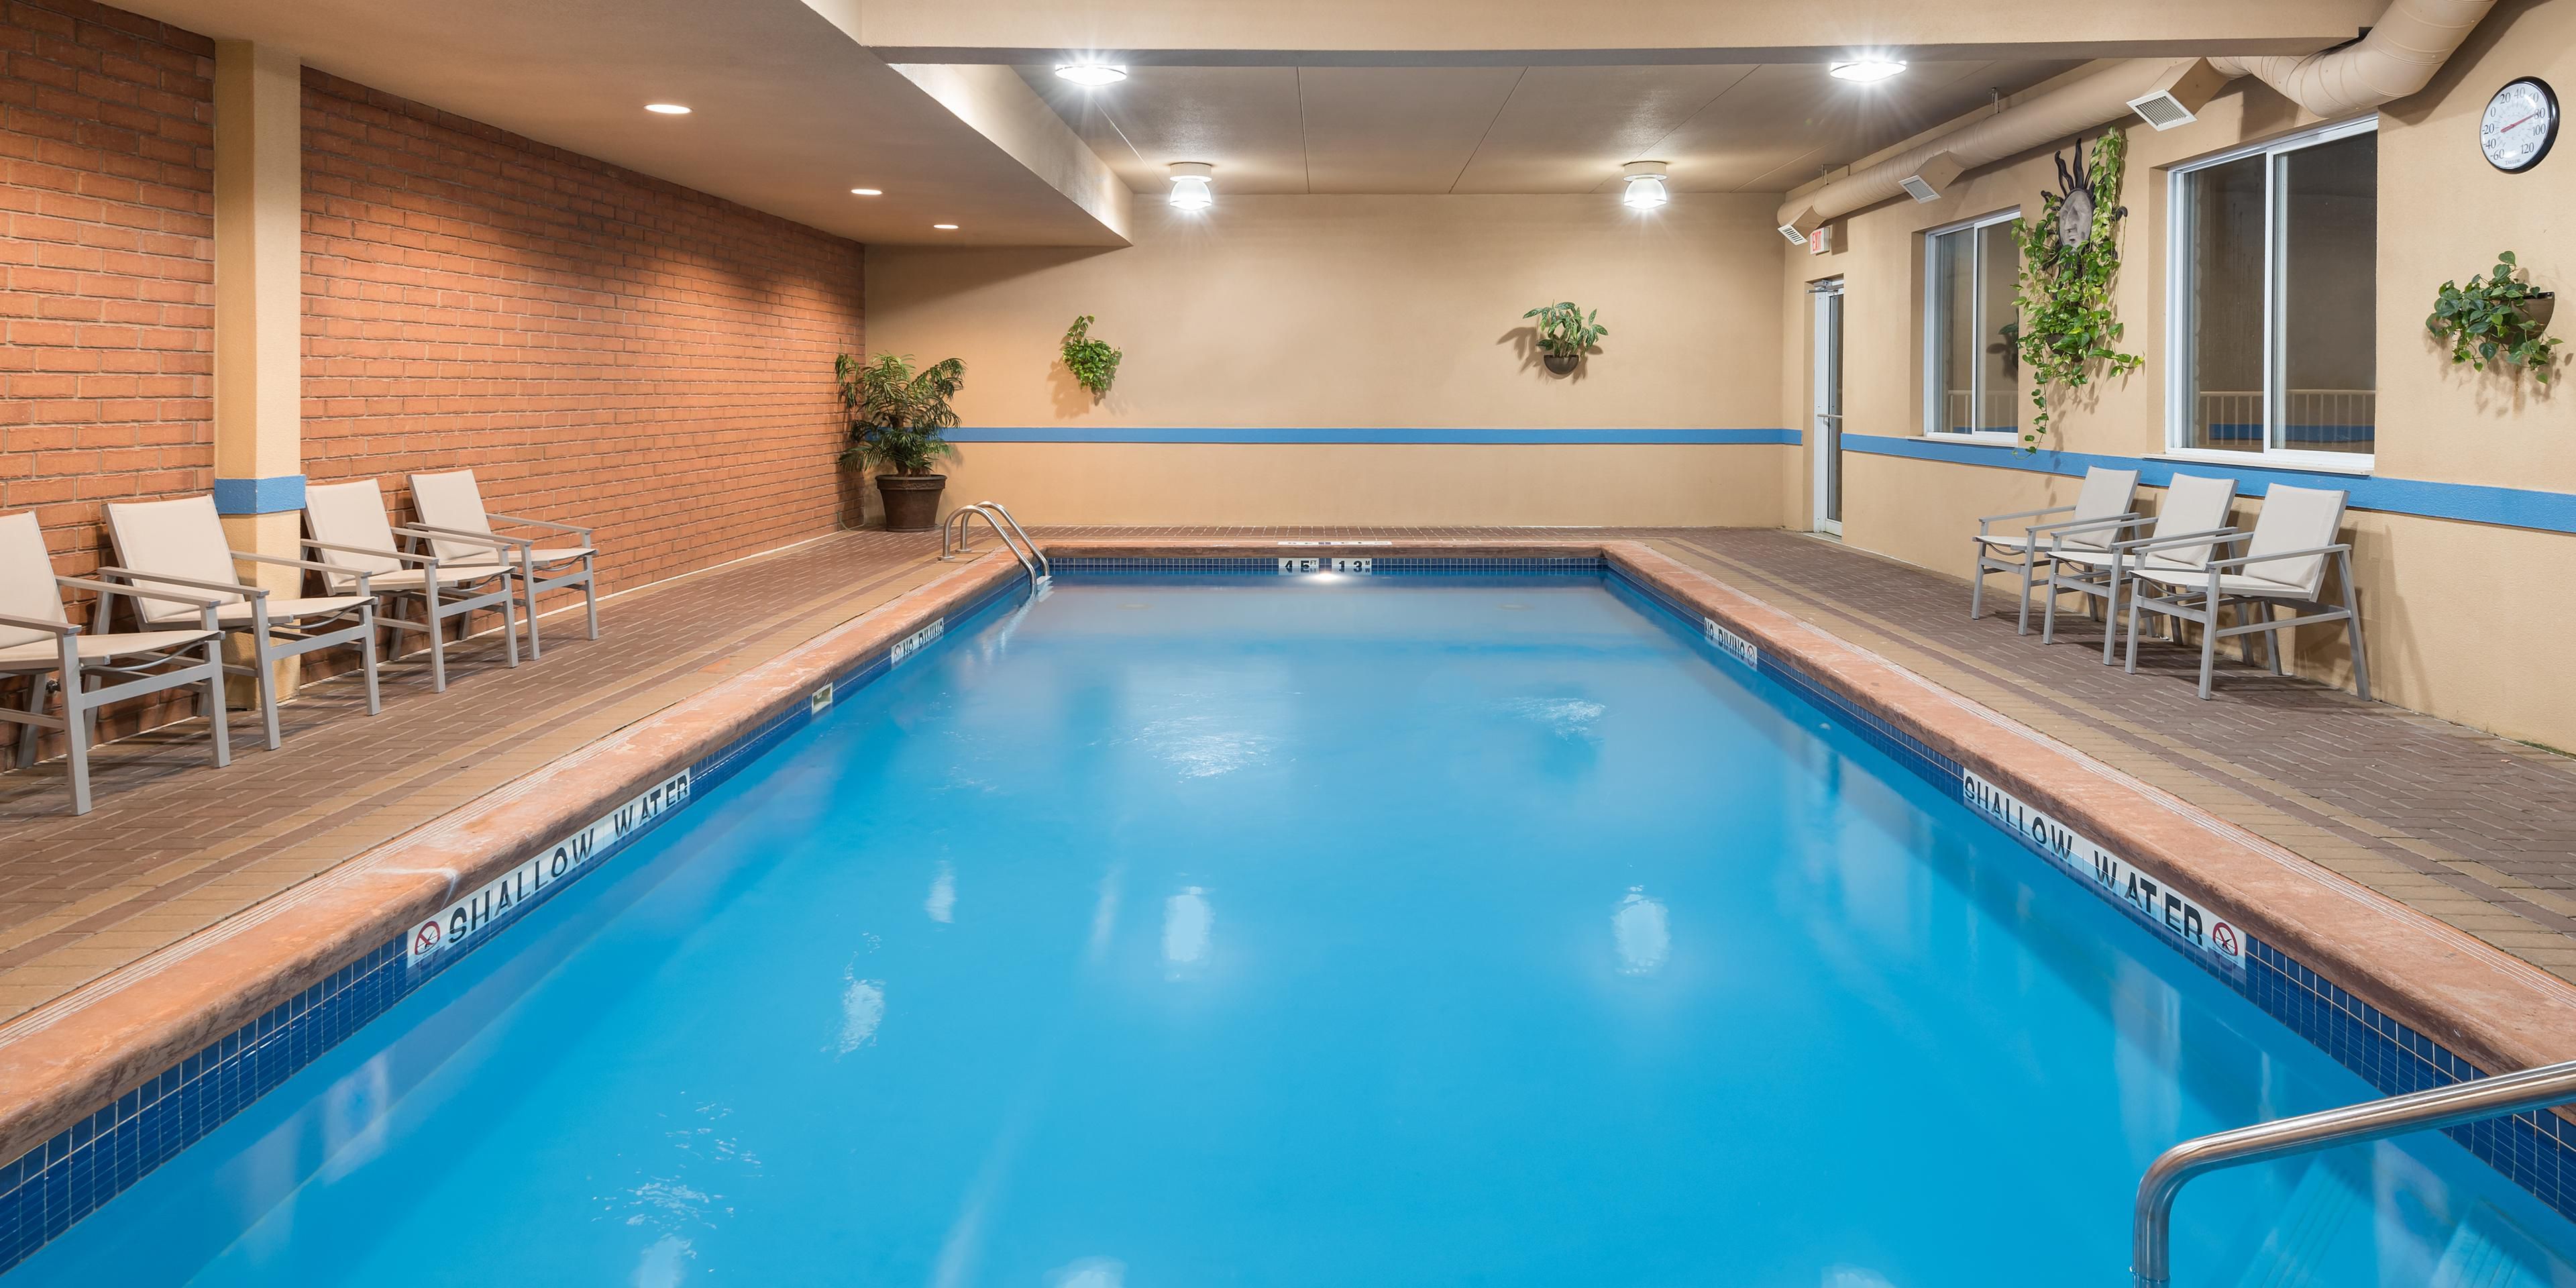 After a long day of sightseeing why not have a swim in our indoor pool then relax on the outdoor patio.  